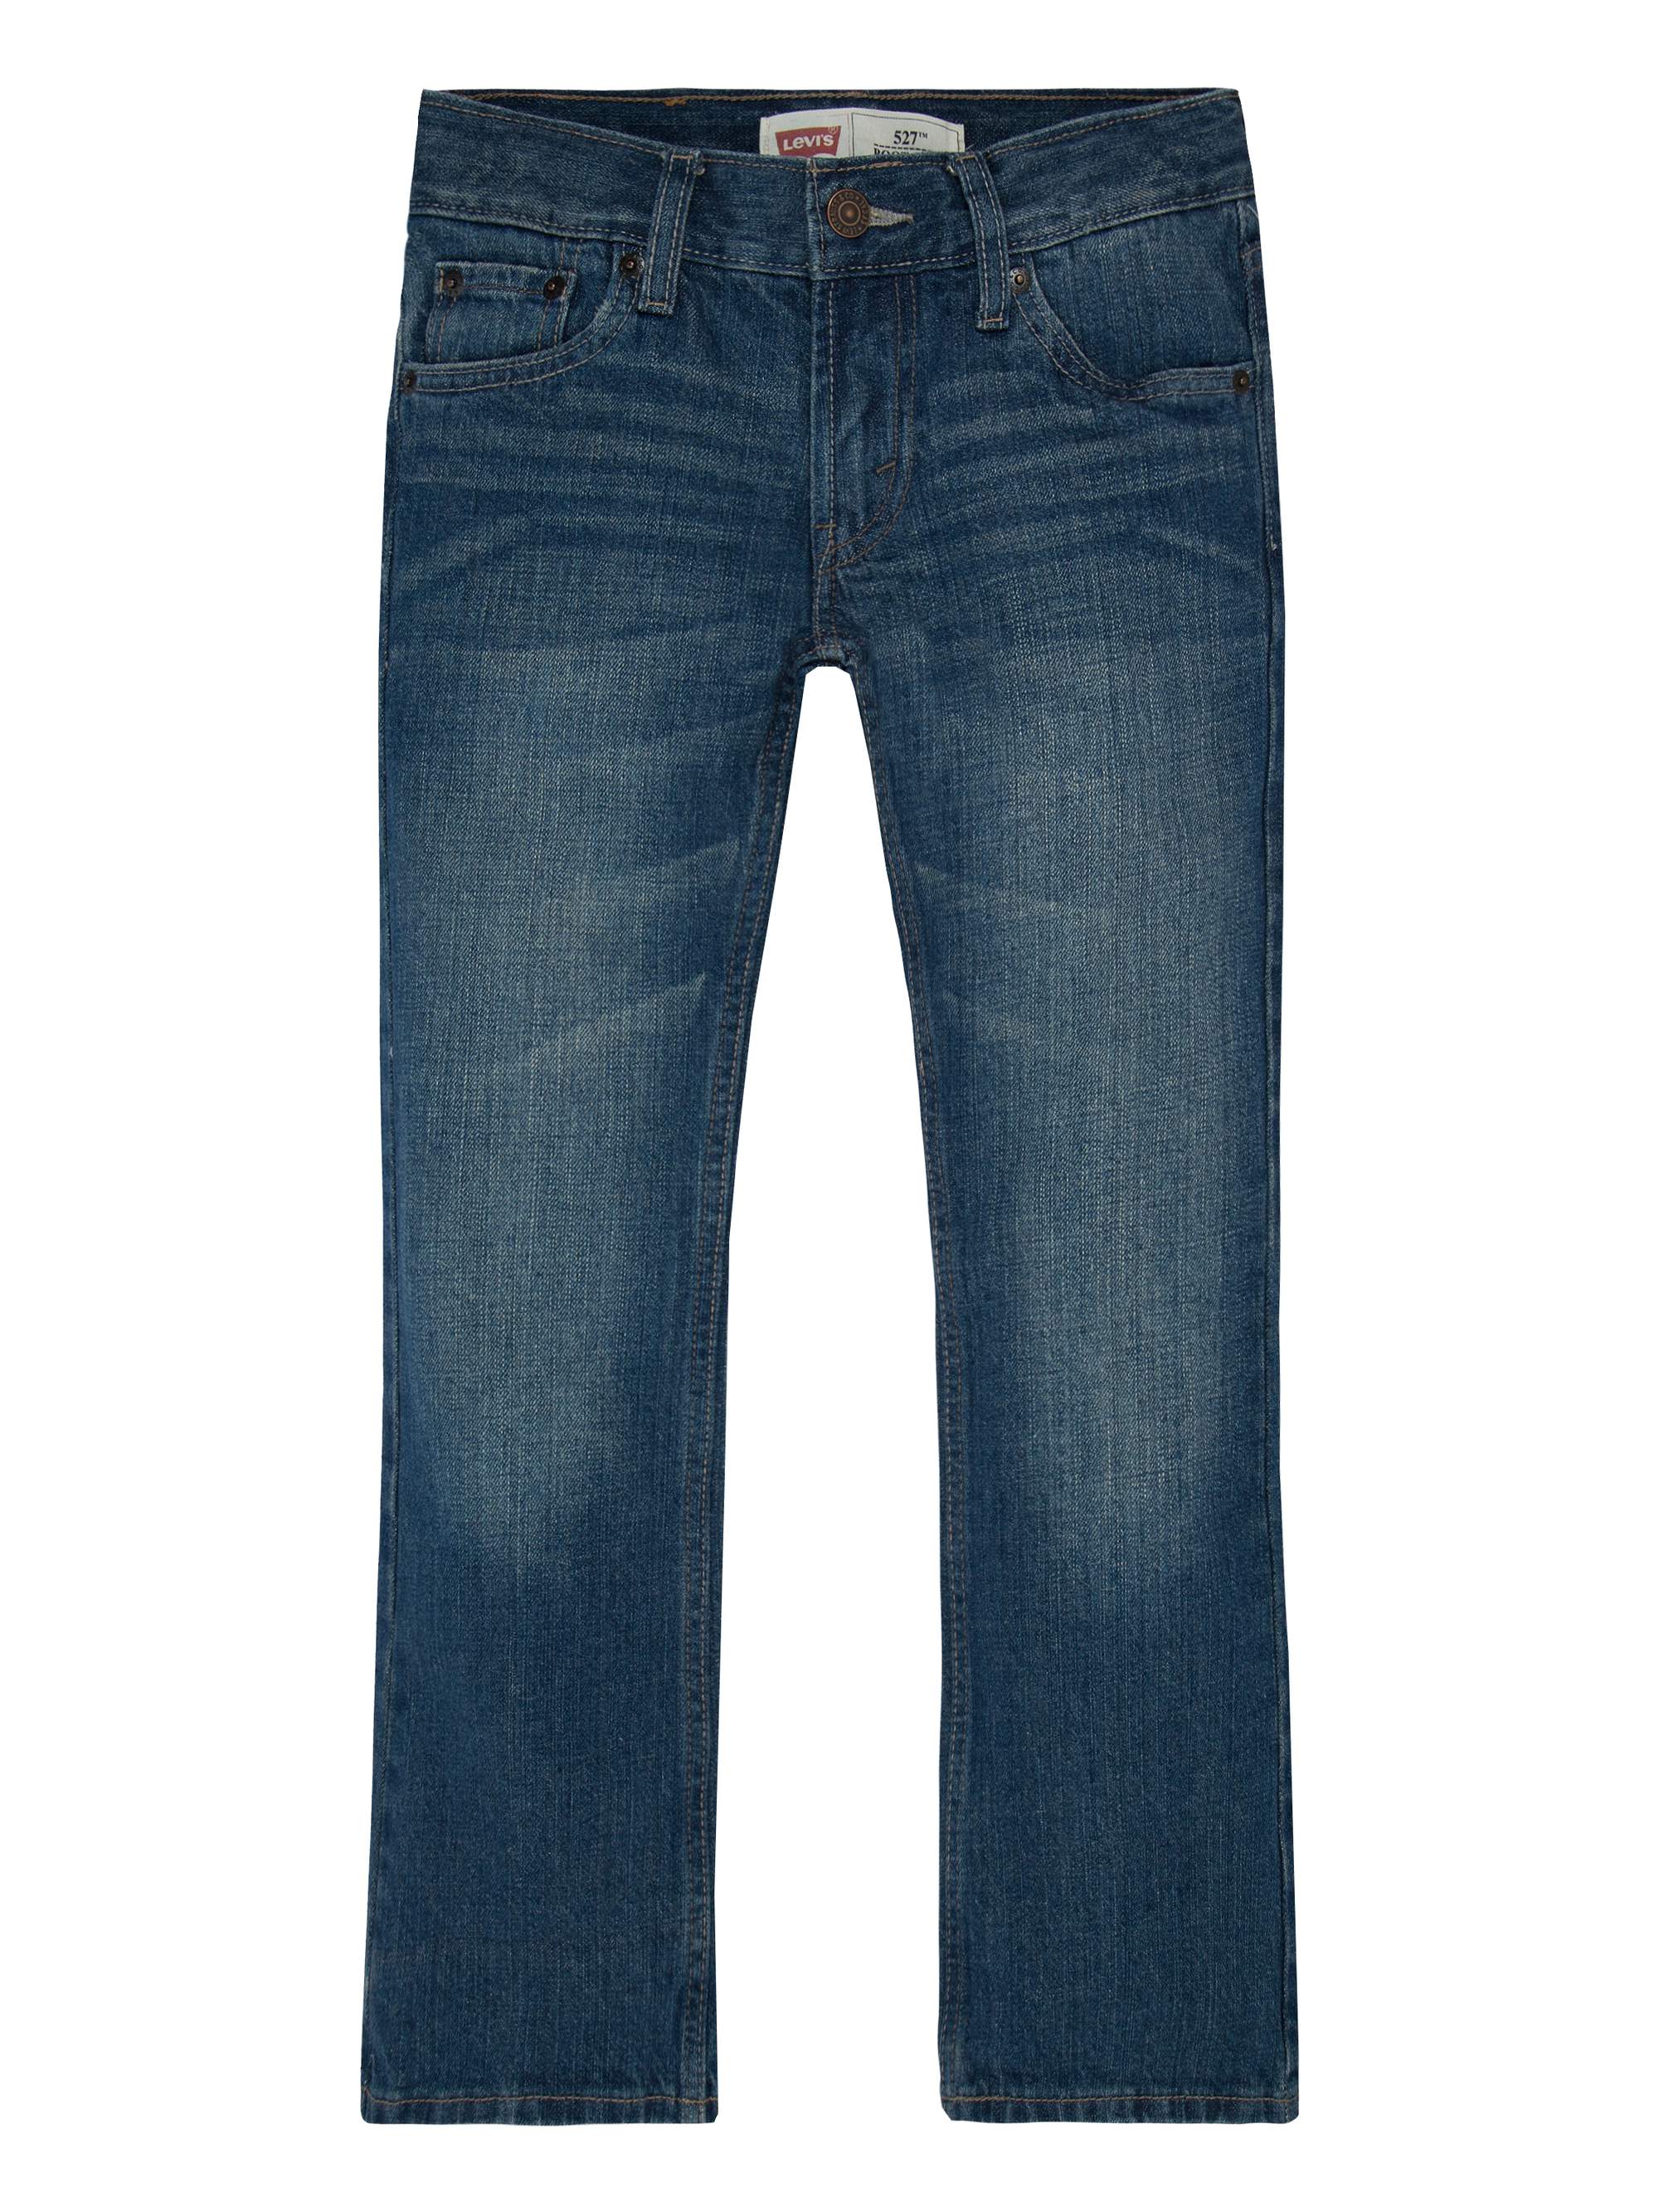 Levi's Boys' Boot Cut Jeans - image 1 of 5